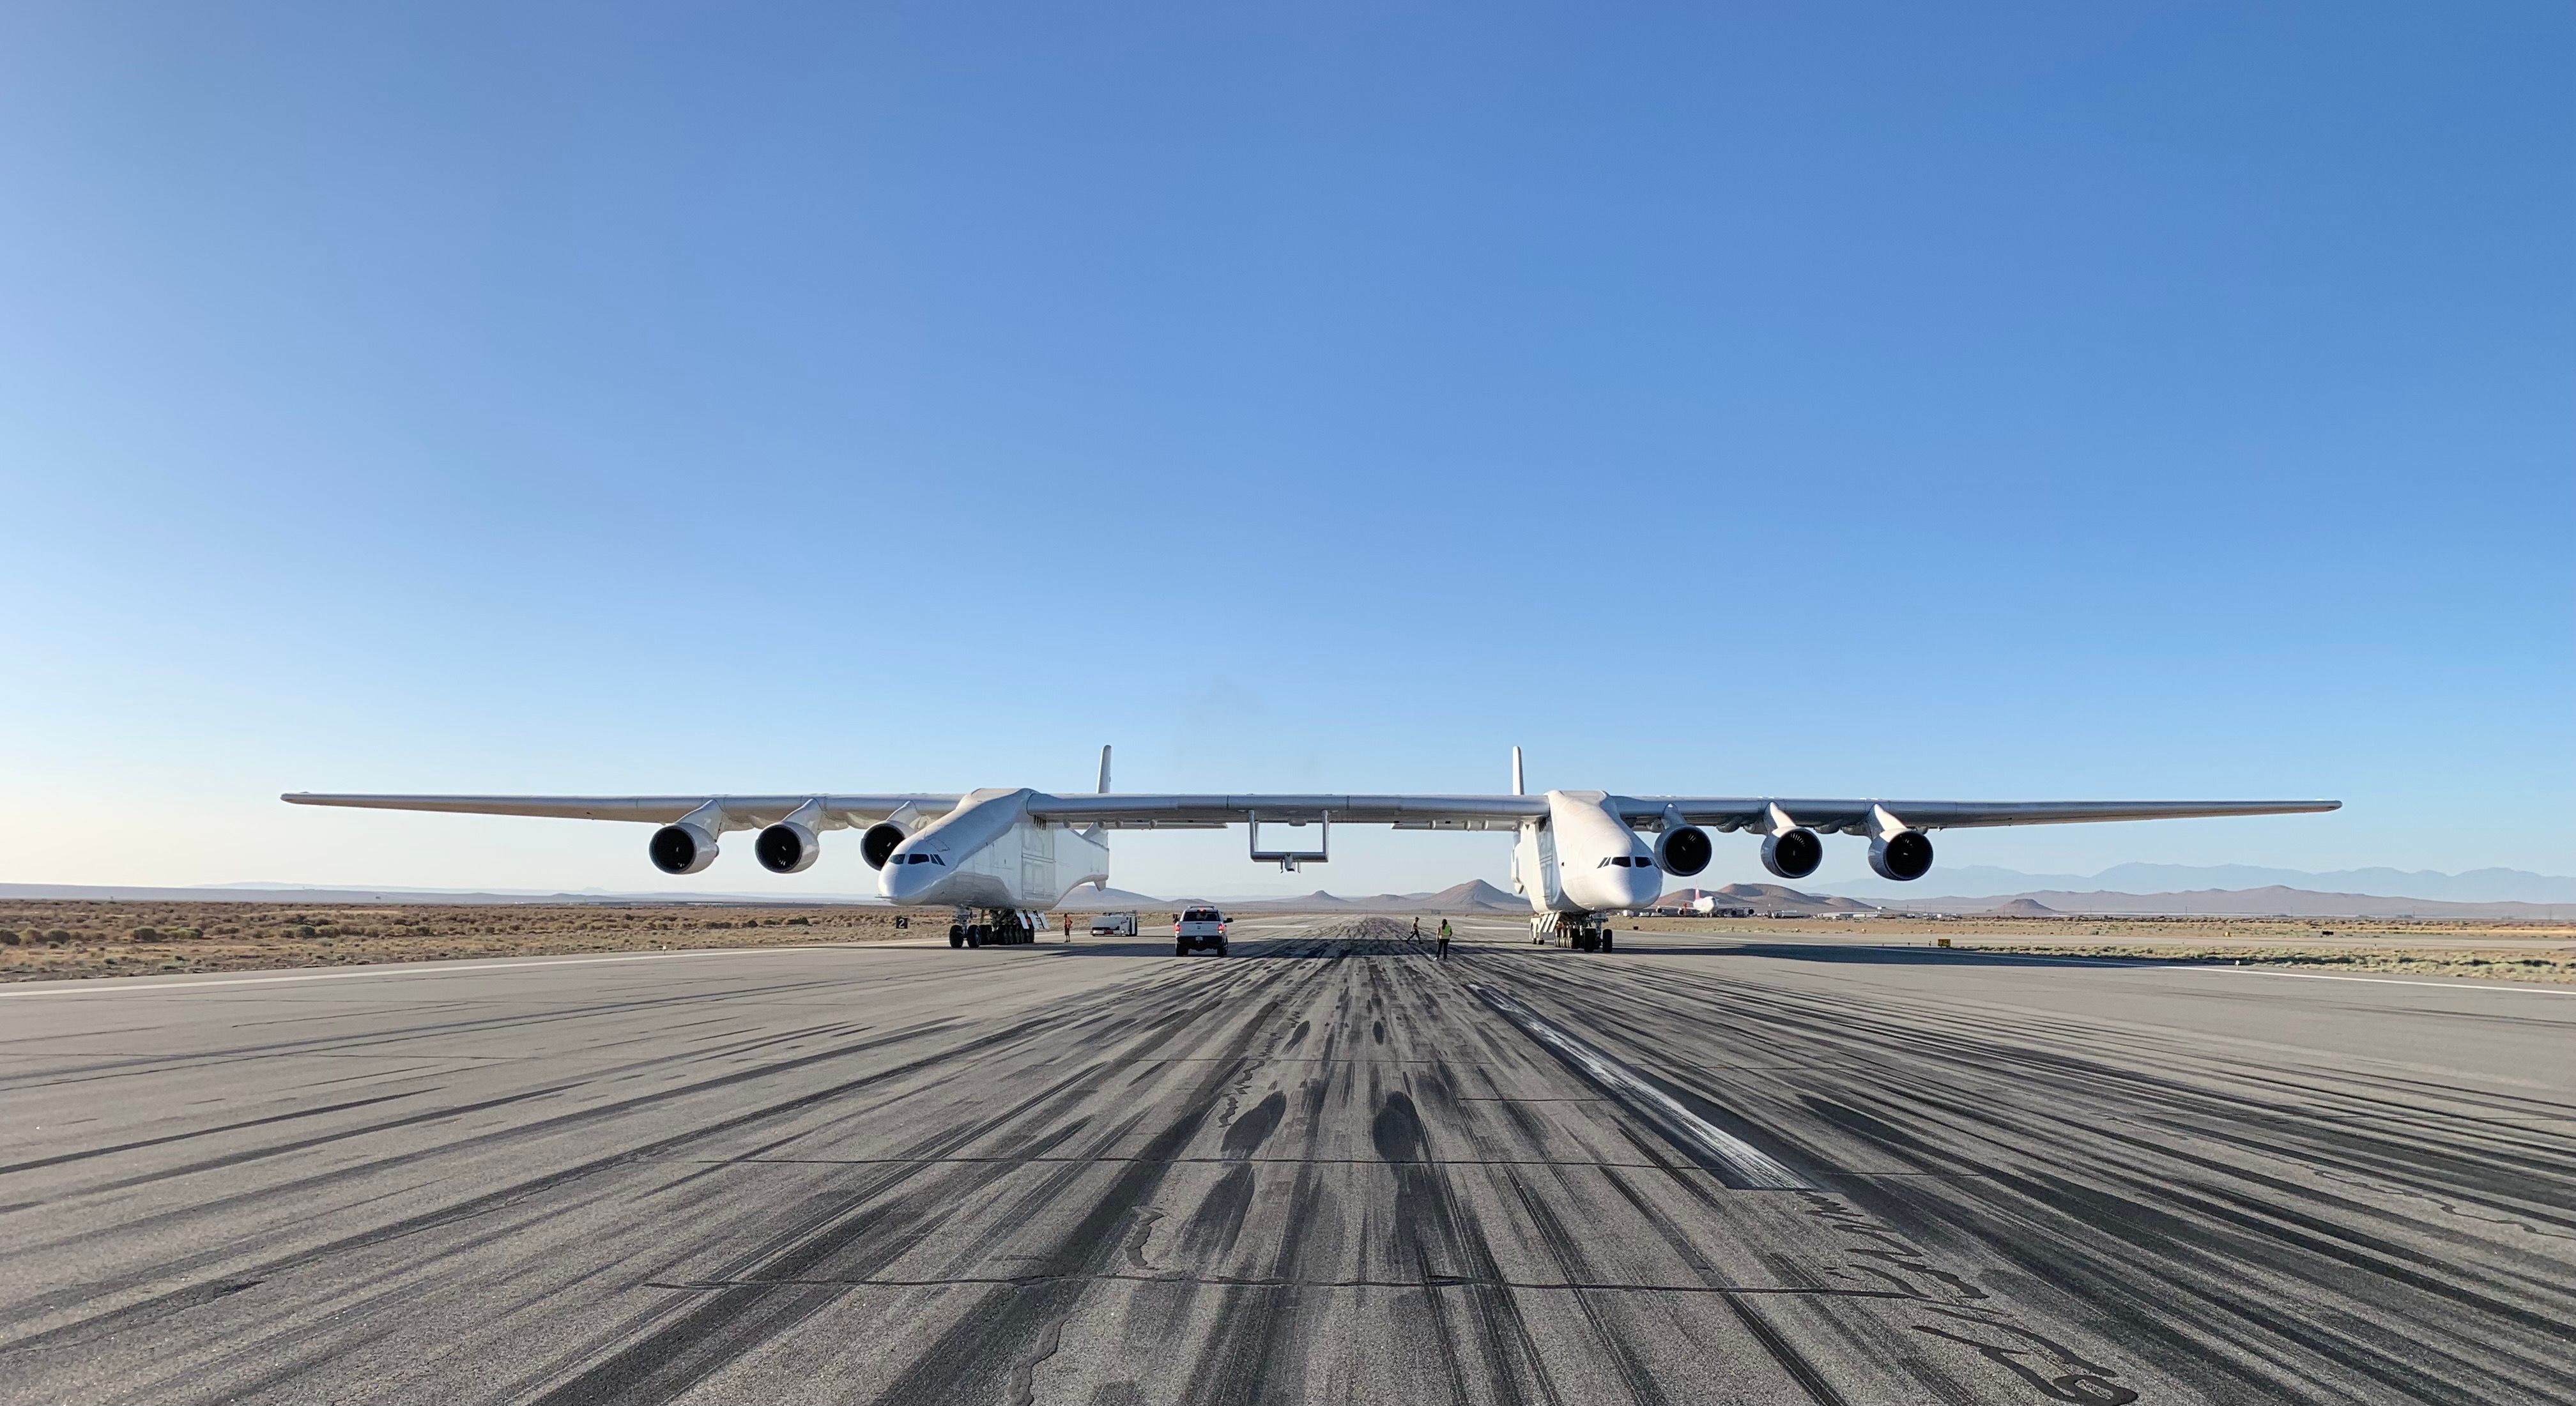 Stratolaunch Test Flight Abandoned After 'Unexpected Results'